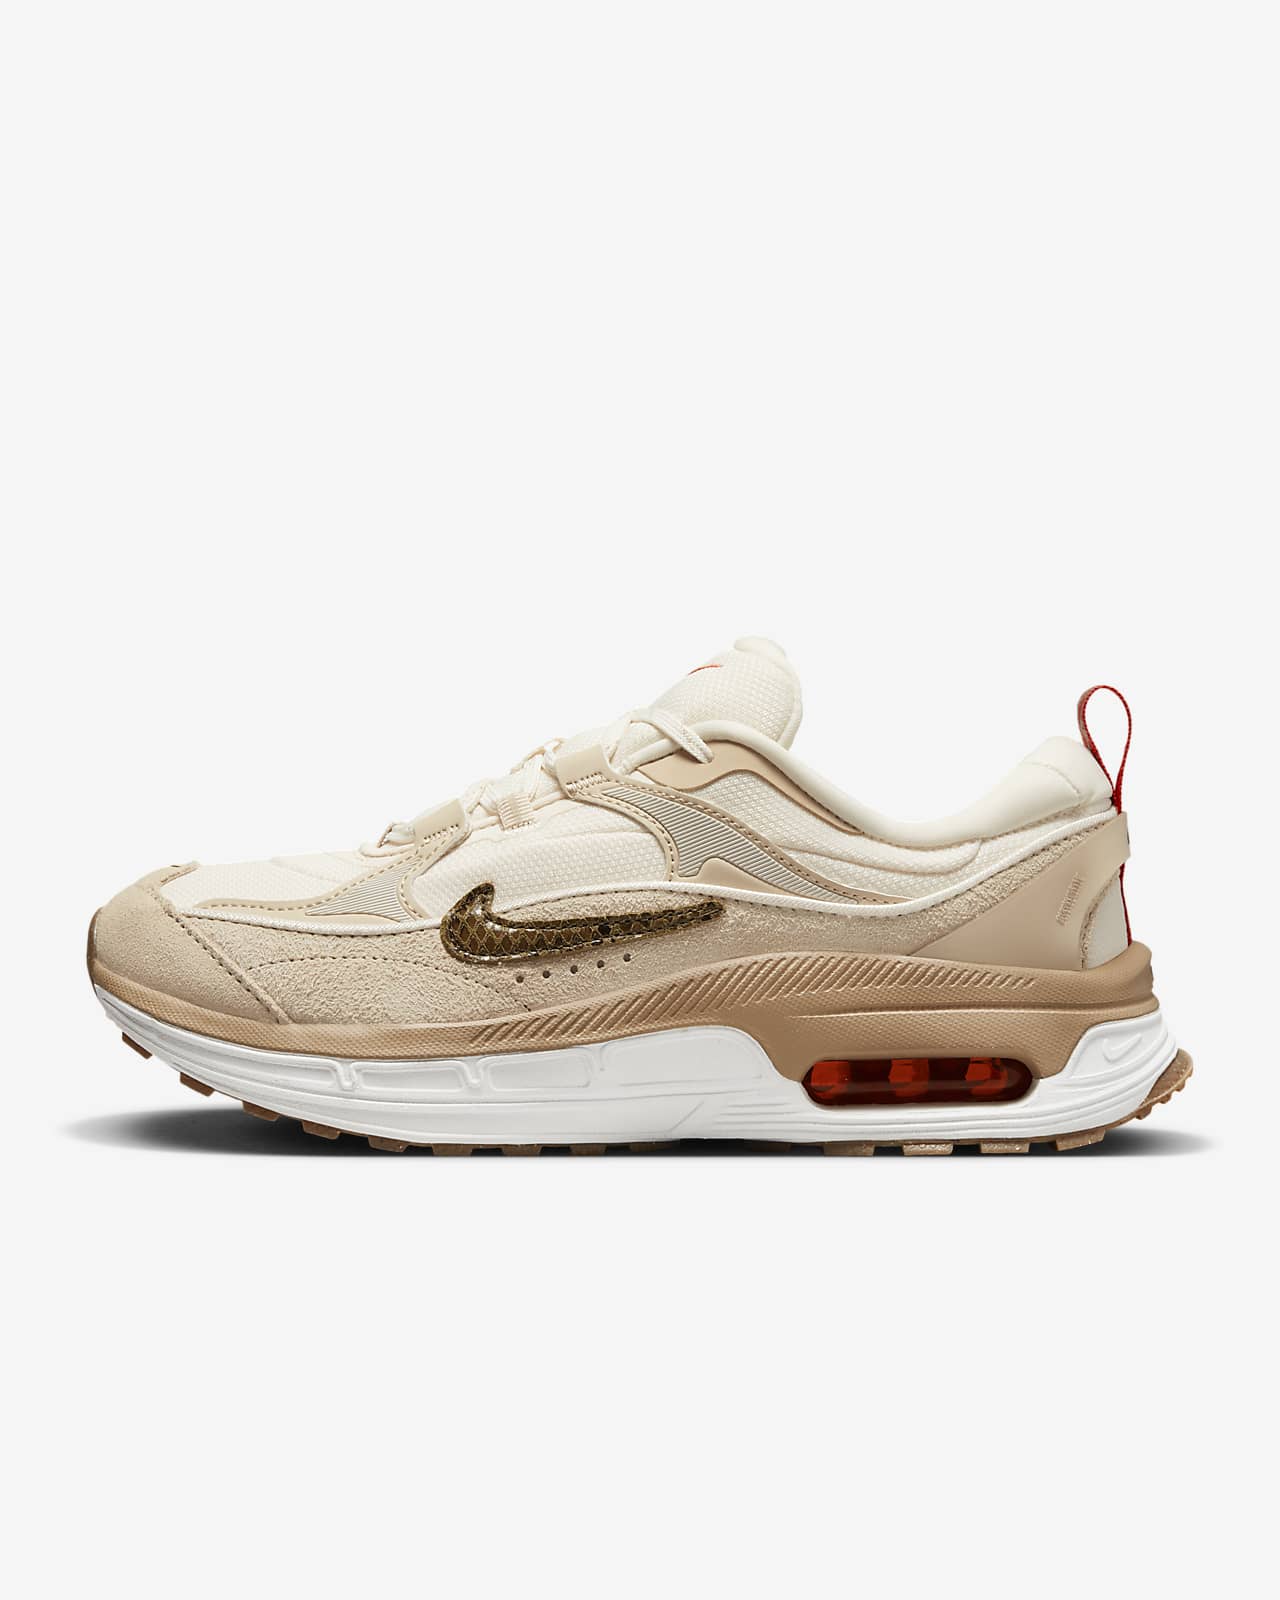 Nike Air Max Bliss SE Women's Shoes